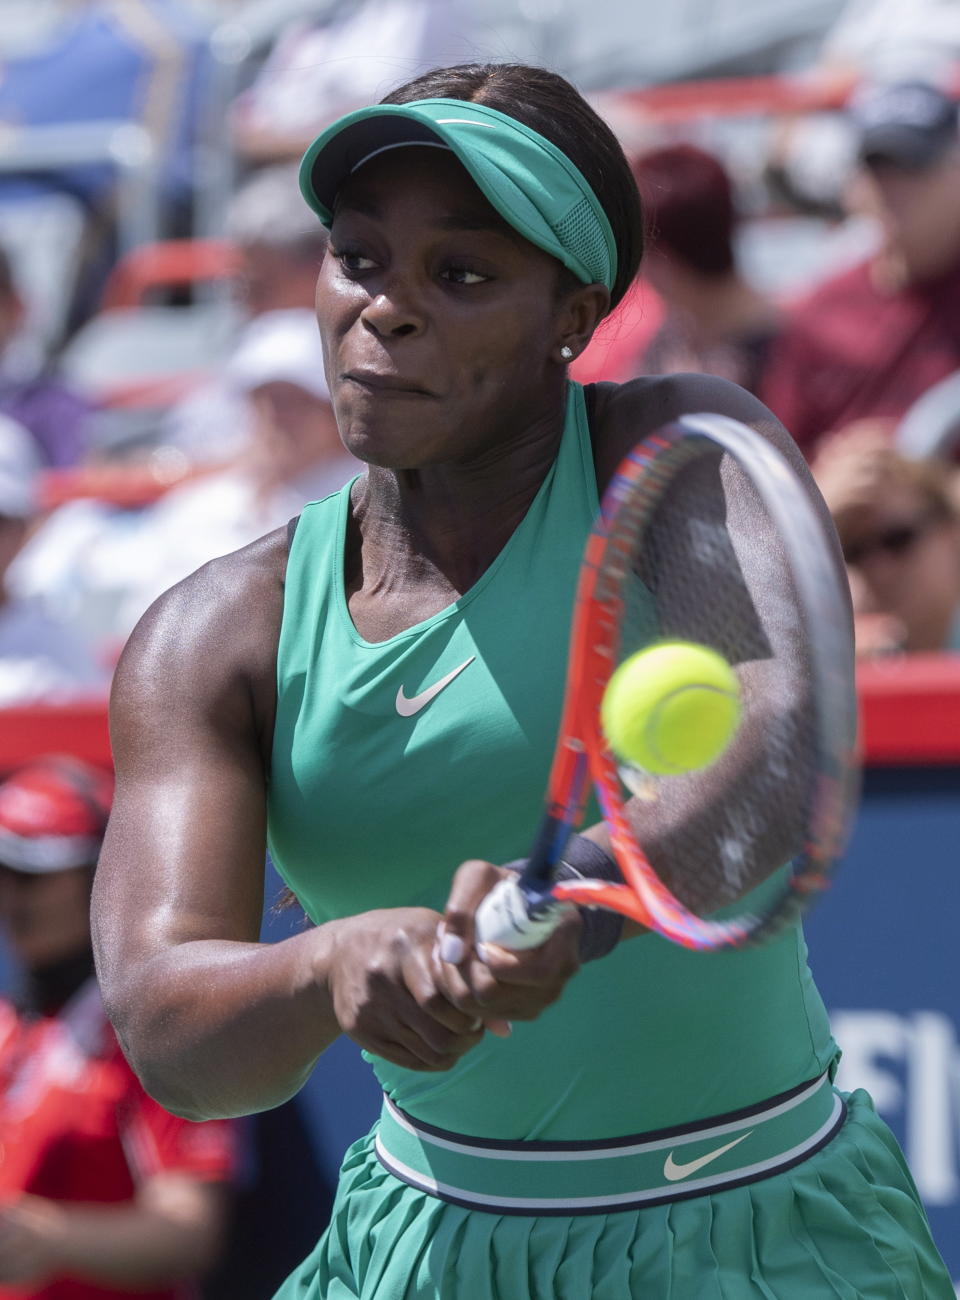 Sloane Stephens of the United States returns to Anastasija Sevastova of Latvia during quarterfinals play at the Rogers Cup tennis tournament Friday, Aug. 10, 2018 in Montreal. (Paul Chiasson/The Canadian Press via AP)